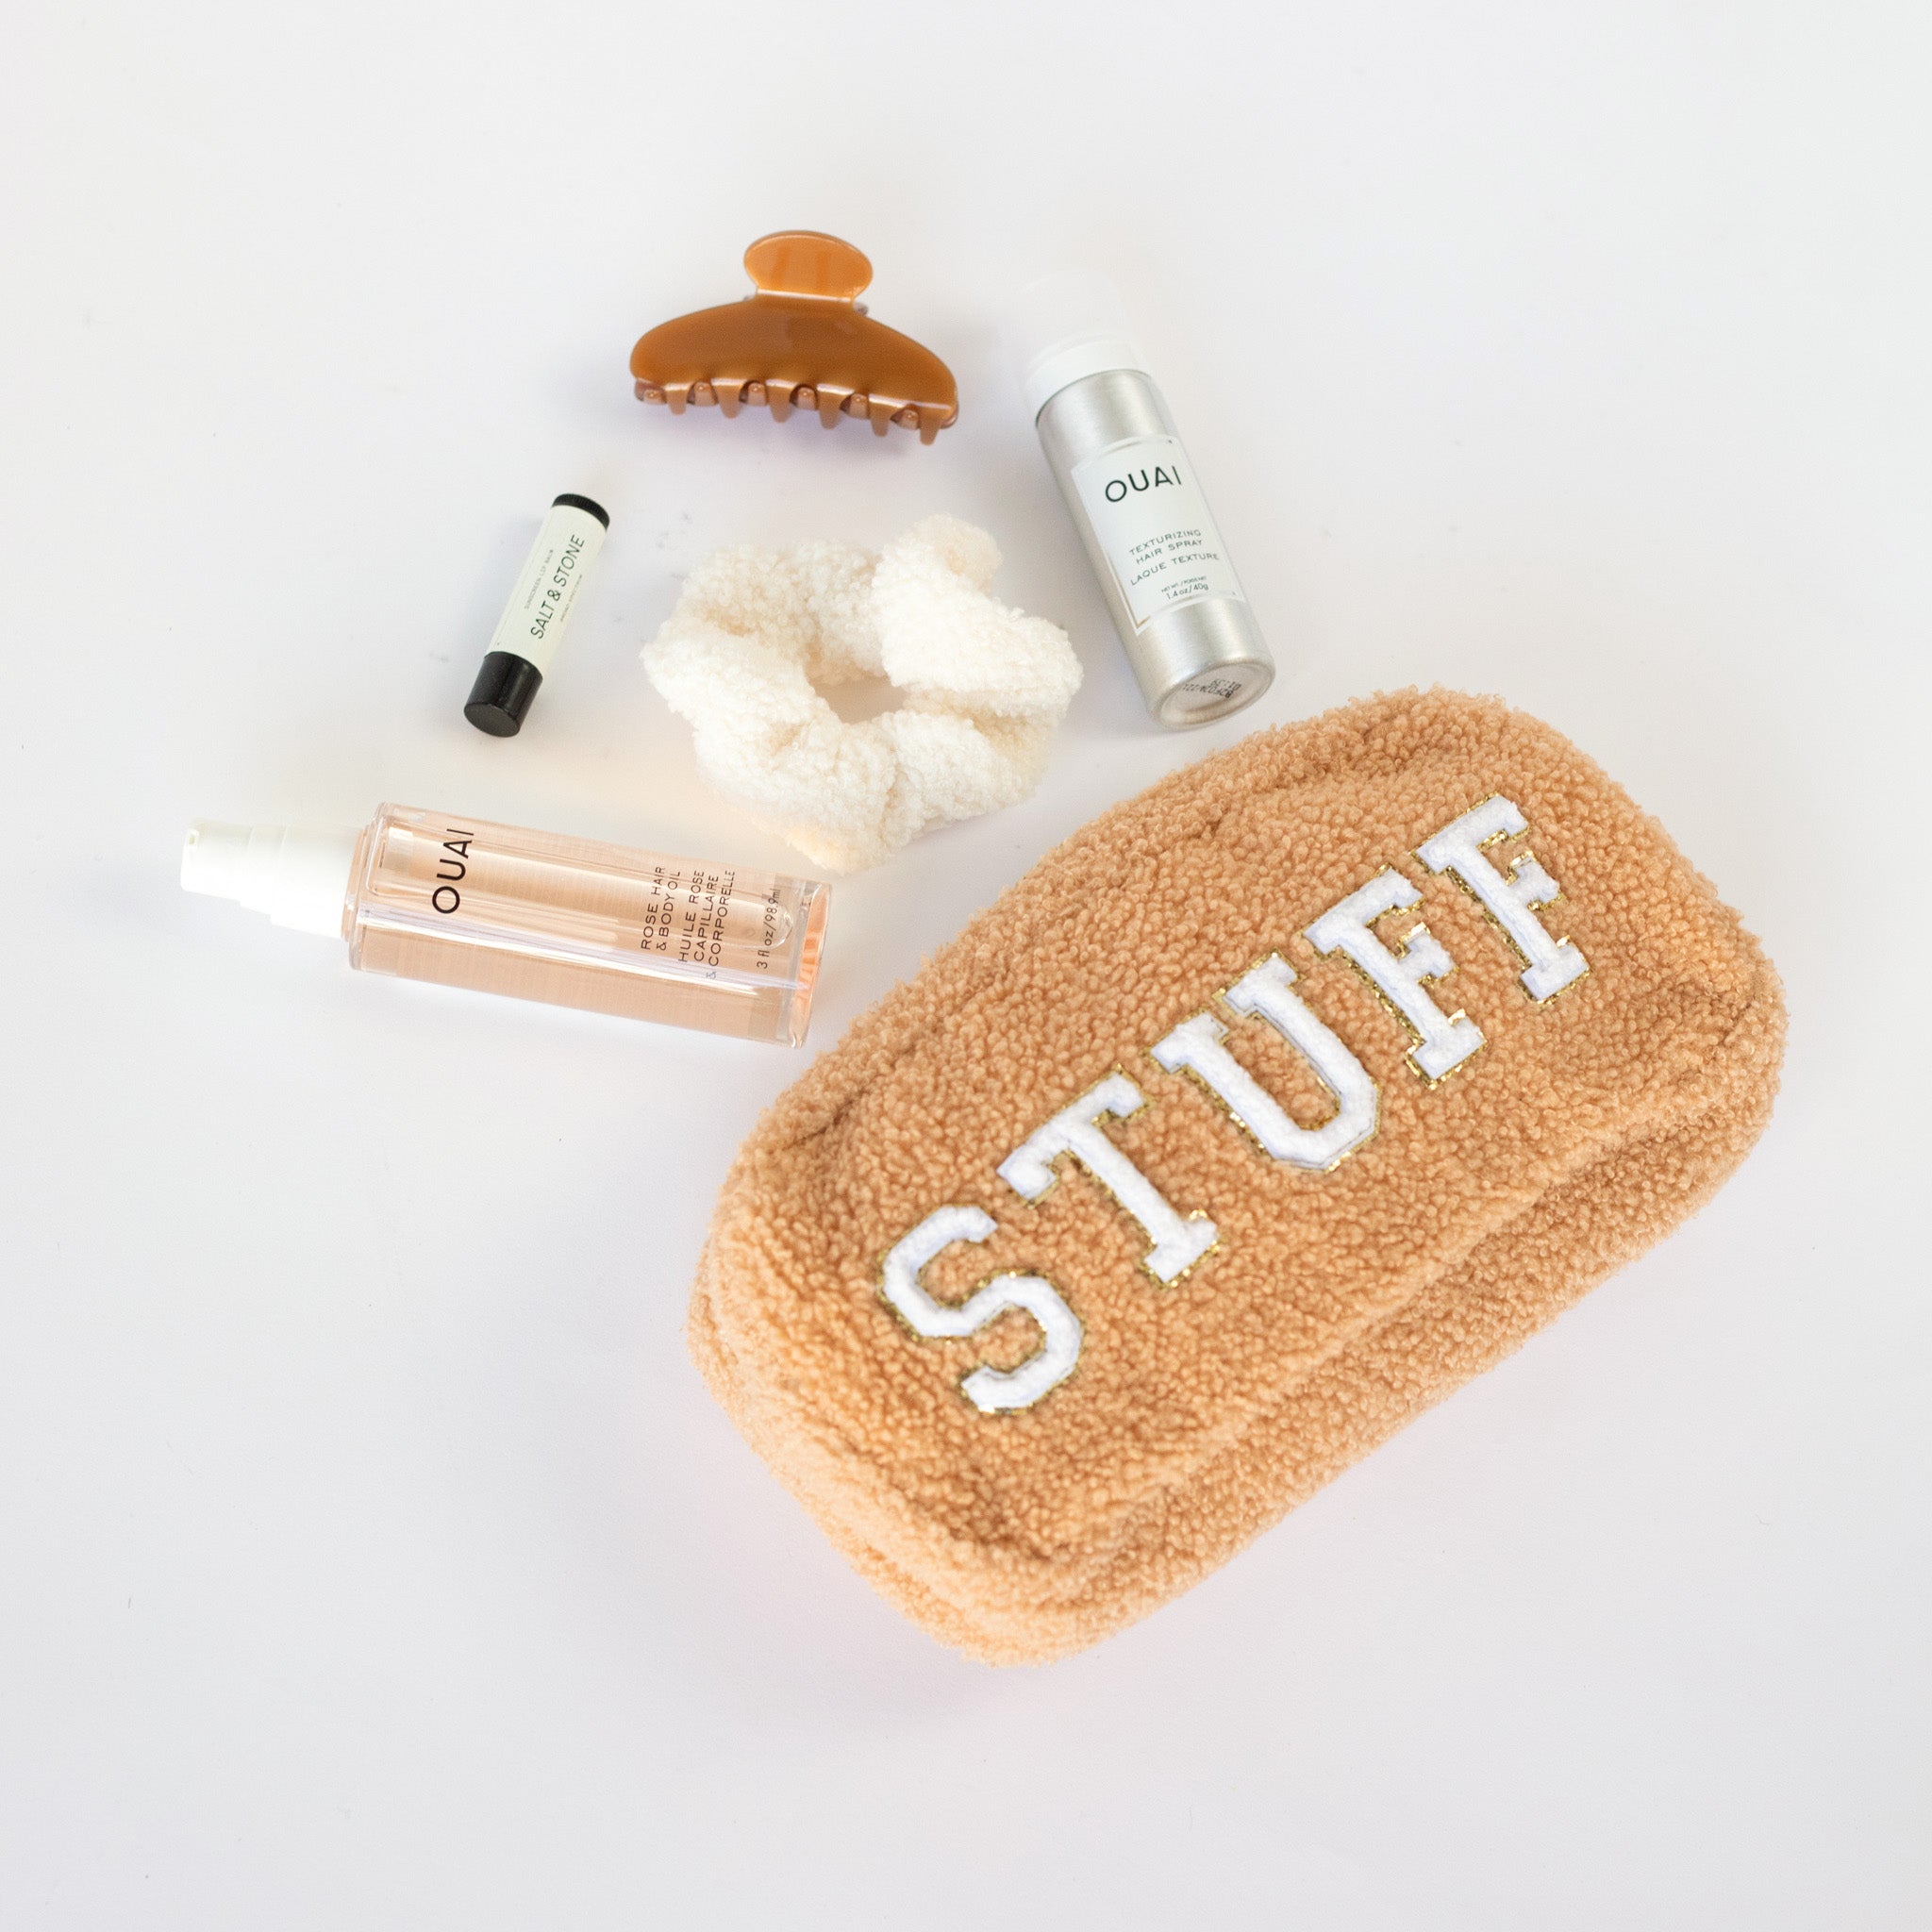 A brown sherpa teddy medium-sized cosmetic bag with gold-trimmed white letters spelling out the word "STUFF" across the length of the bag. Laying on the white background is a bottle of peach colored Ouai hair oil, a Salt + Stone chapstick, a winter white sherpa hair scrunchie, a spray can of Ouai texturizing hair spray, and a caramel colored claw clip.